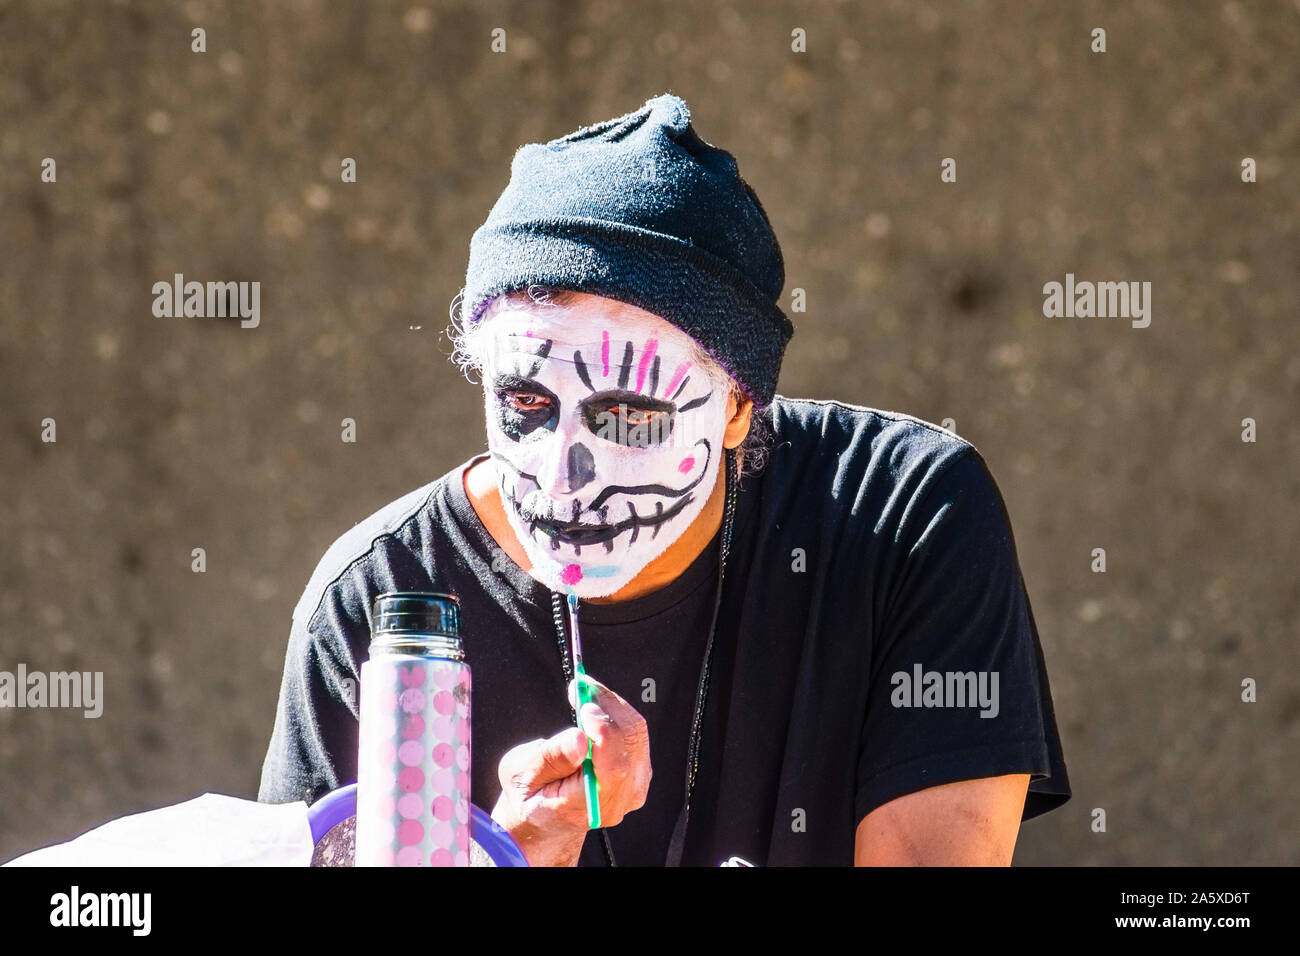 Oct 20, 2019 San Jose / CA / USA - Participant at Dia de Los Muertos (Day of the Dead) procession applying make-up and preparing for the event; South Stock Photo